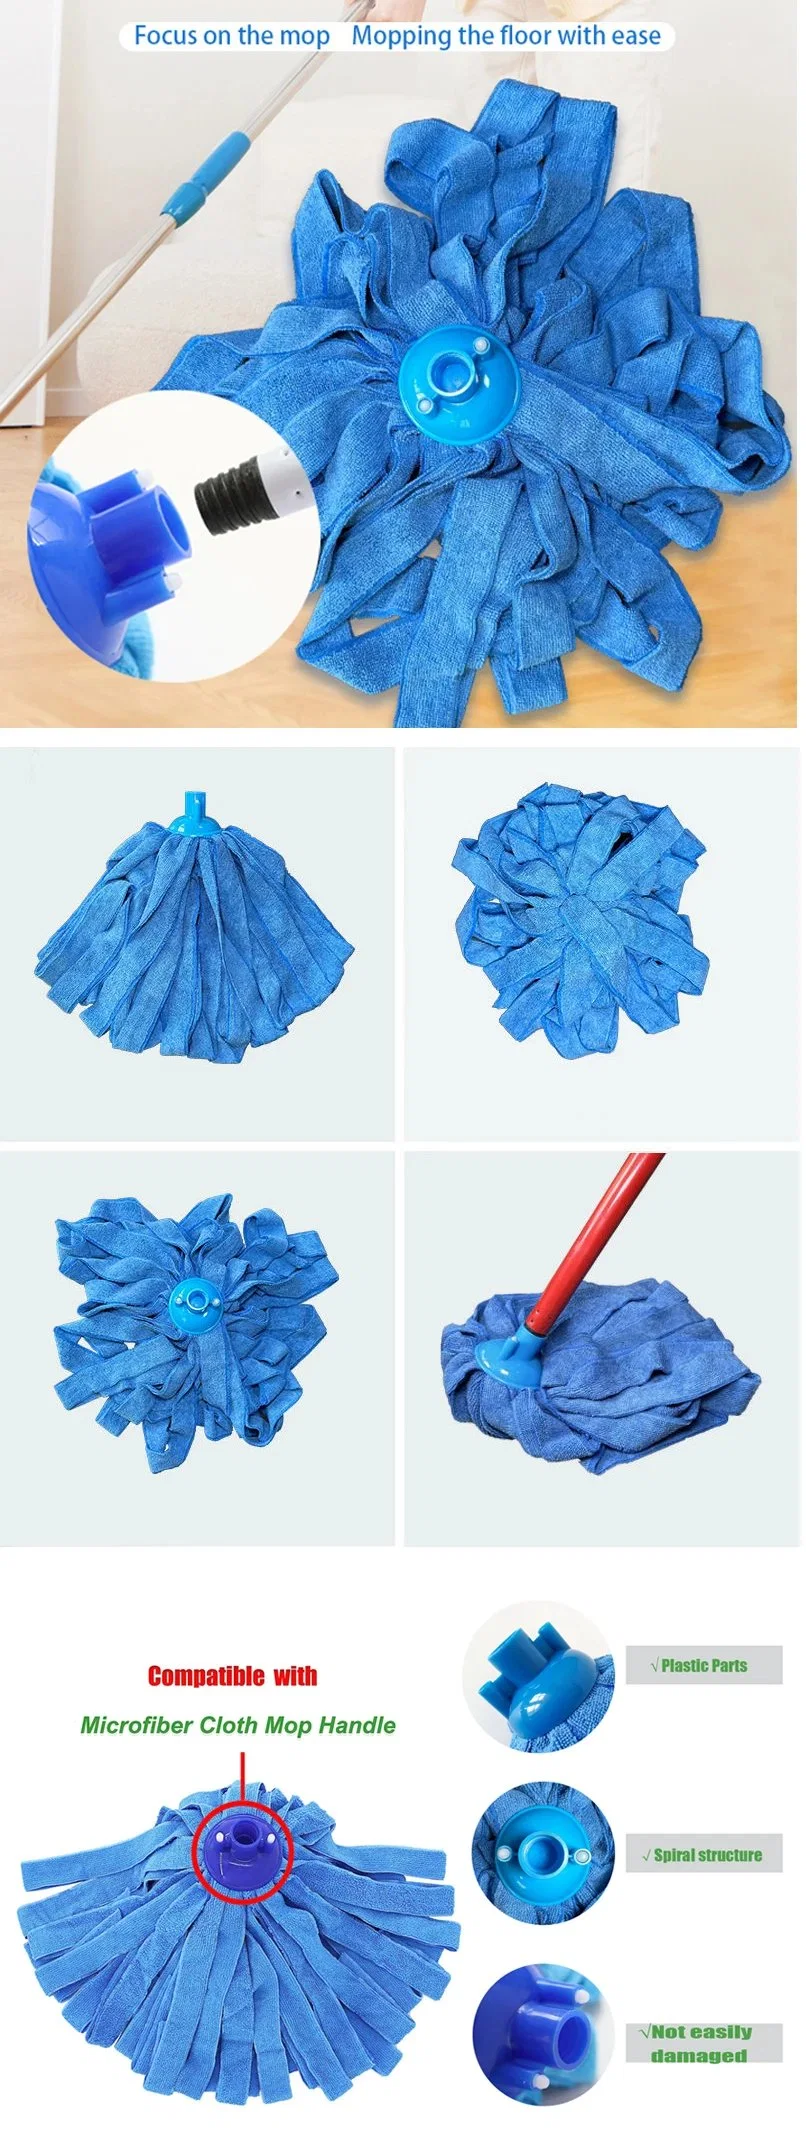 Replaceable Microfiber Mop Head for Household Floor Cleaning